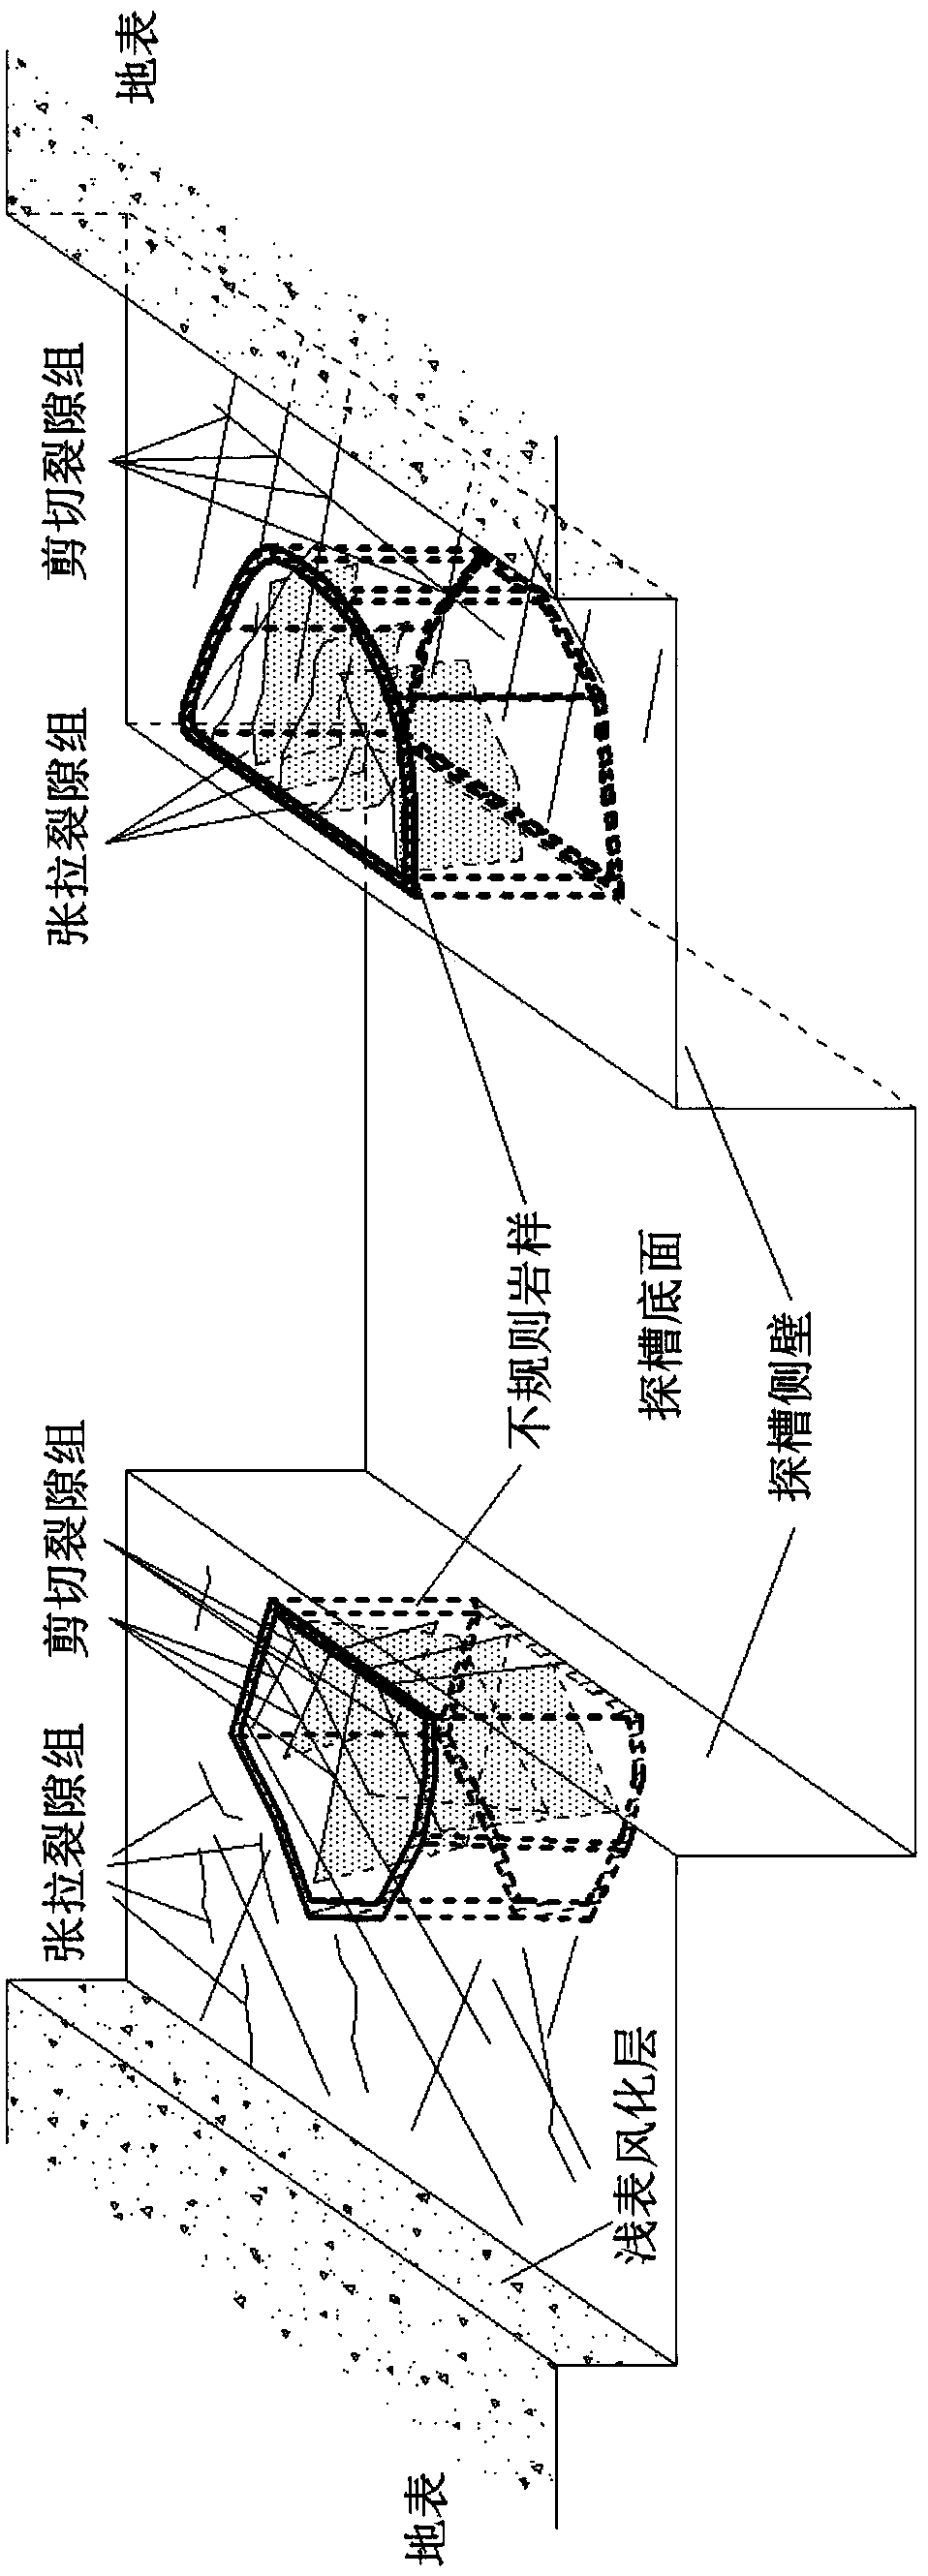 The Sampling Method of Irregular Undisturbed Fractured Rock Grooving and Glue Injection